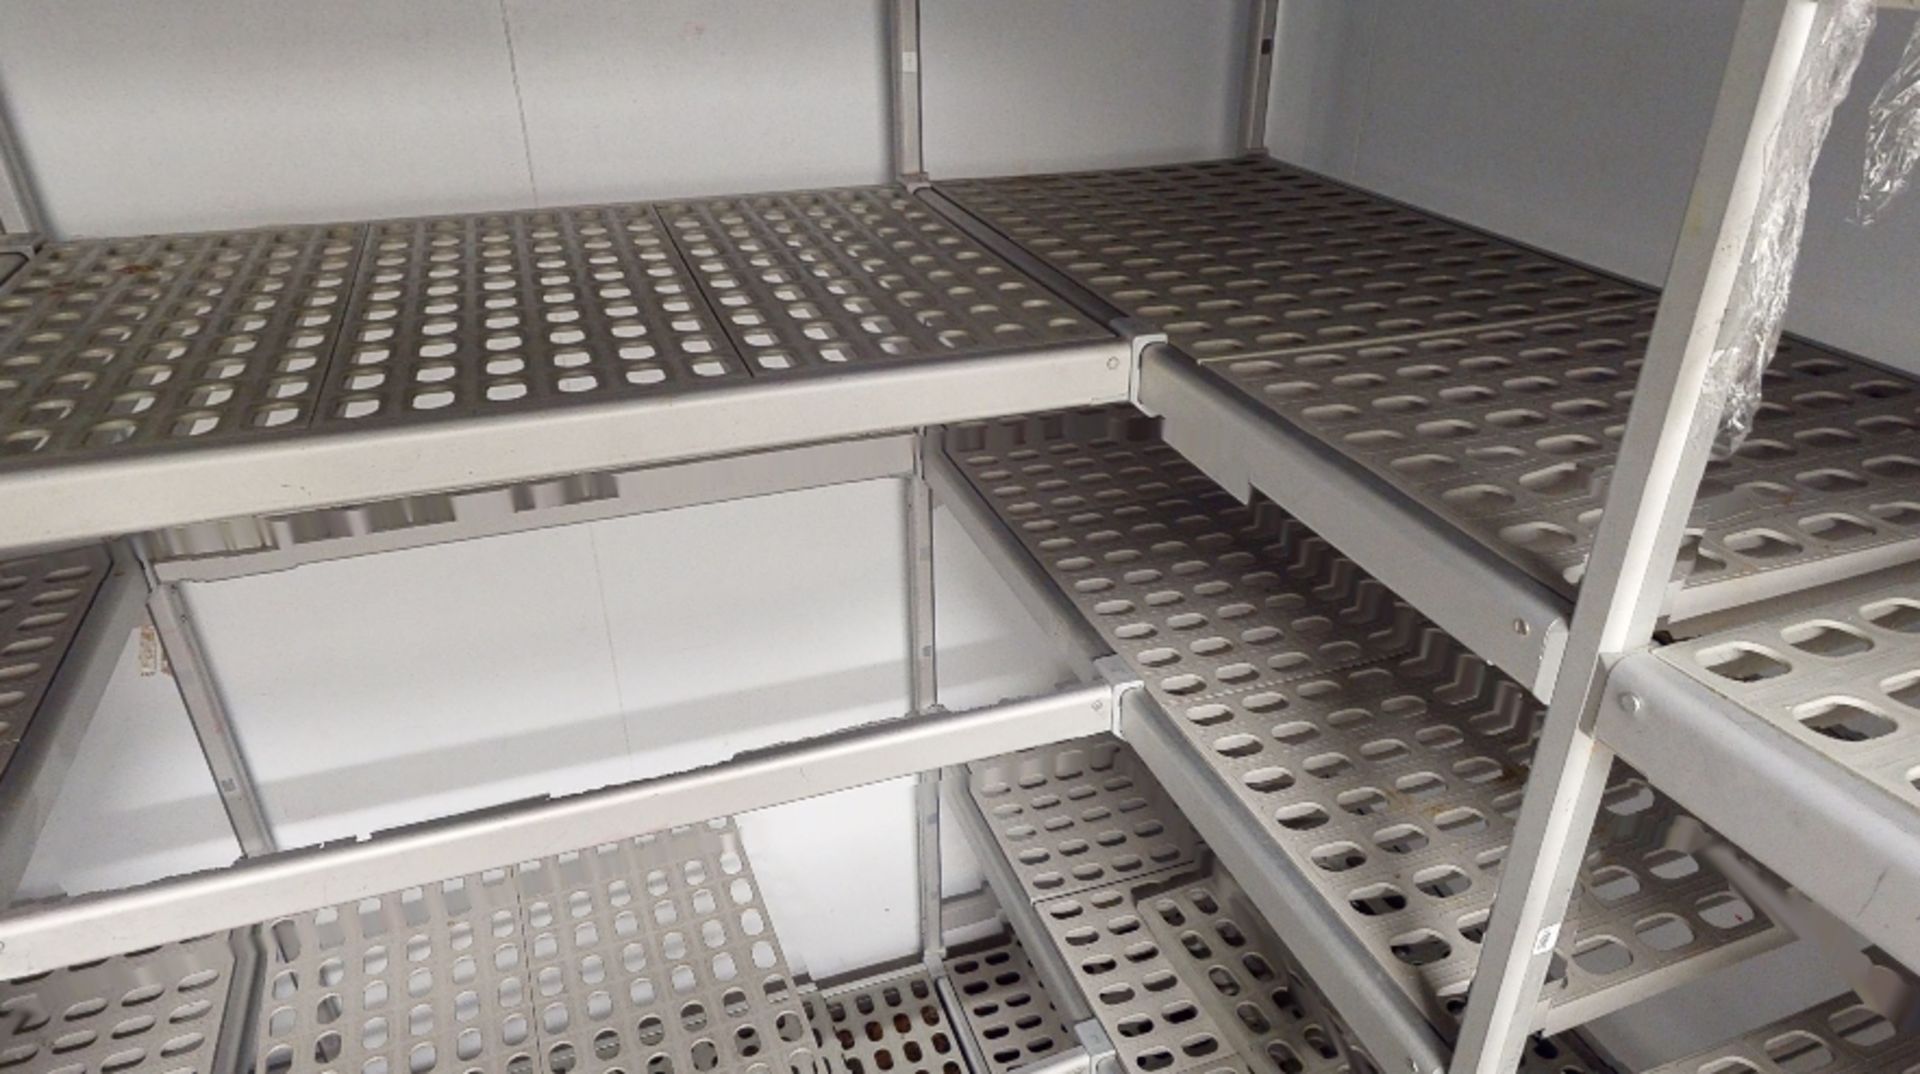 1 x Cold Room Shelving Unit With Aluminium Frame and Perforated Shelf Panels - U Shaped - Image 7 of 8